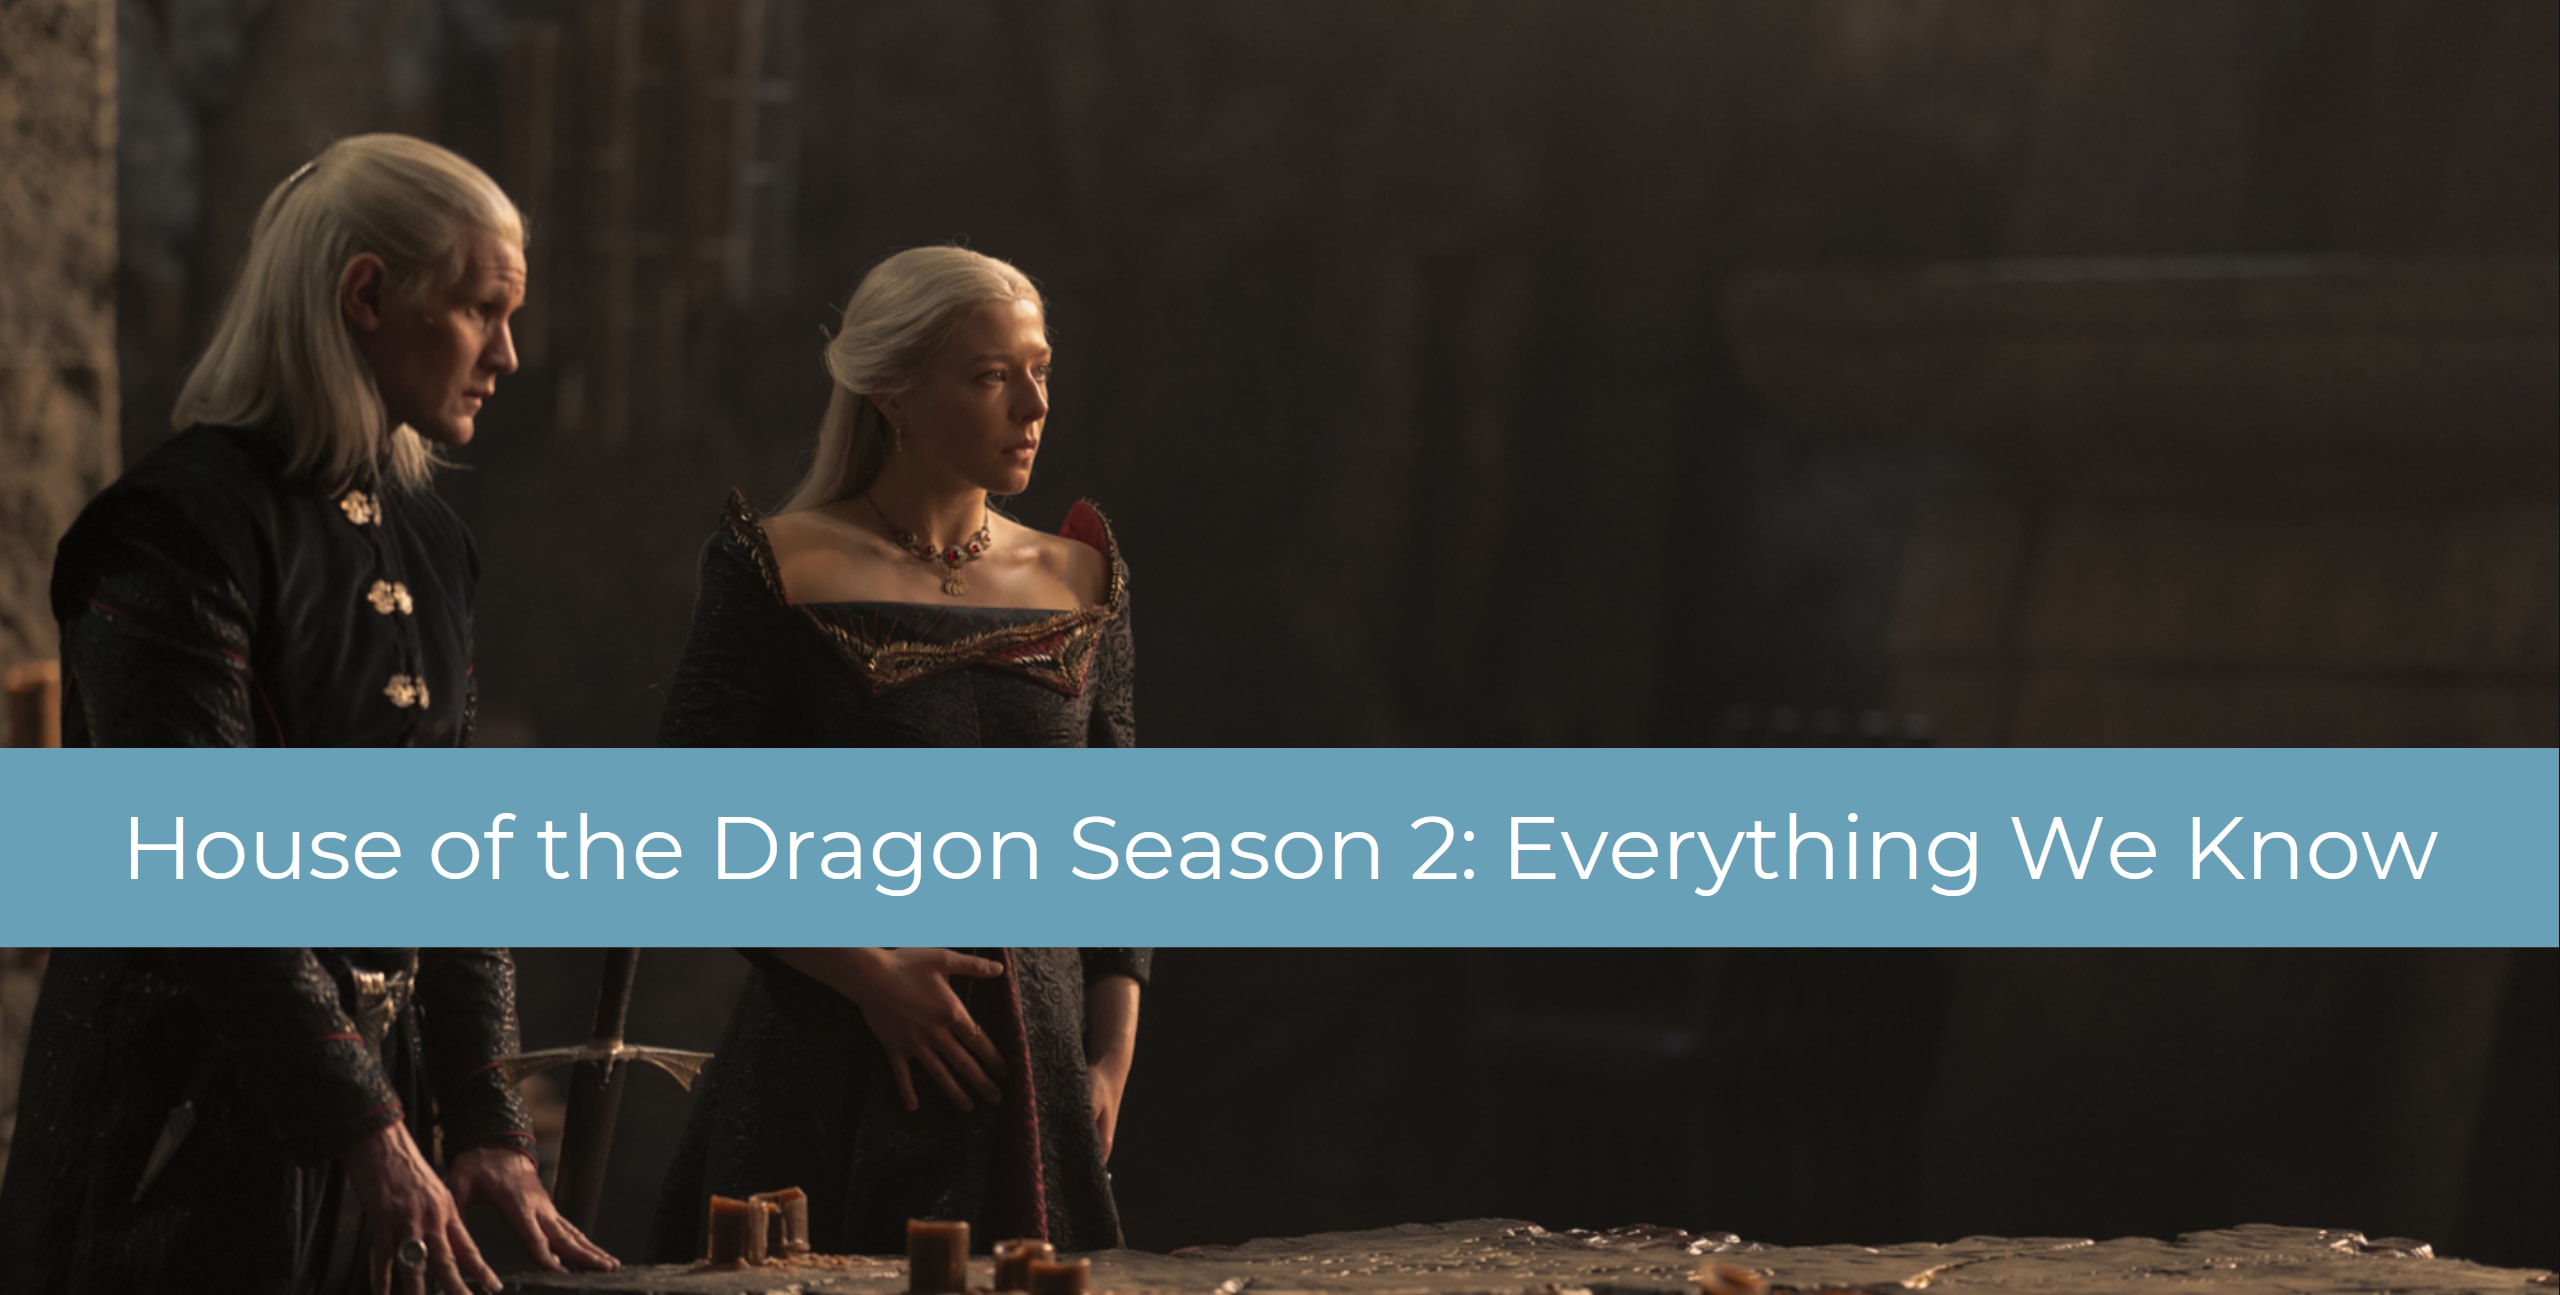 Proof That House of the Dragon Season 2 Is Coming